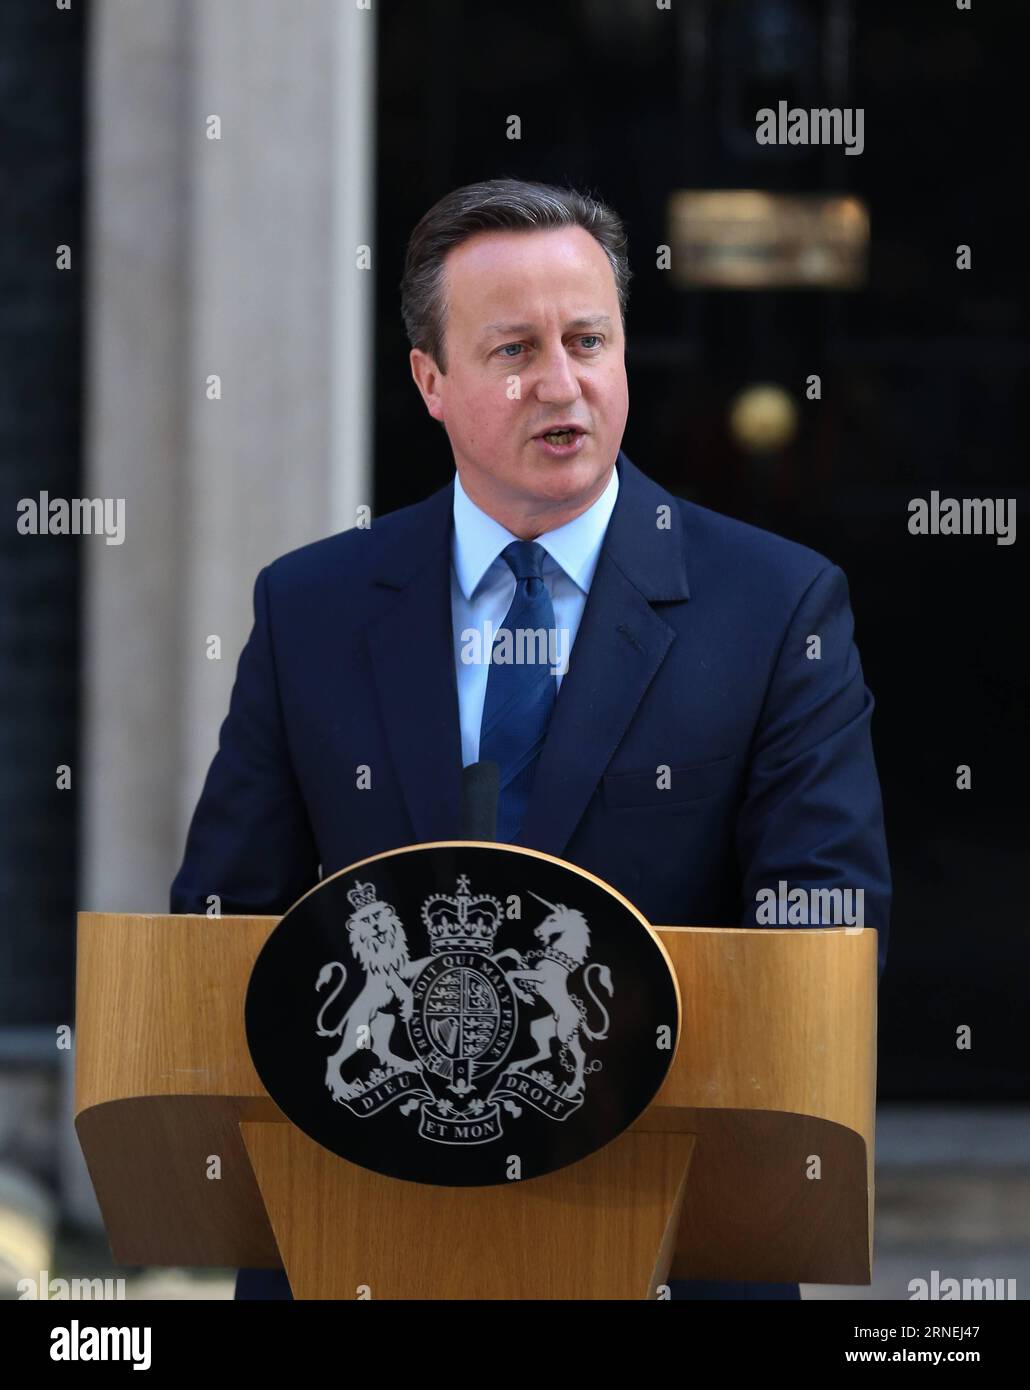 (160624) -- LONDON, June 24, 2016 -- British Prime Minister David Cameron delivers a speech at 10 Downing Street in London, Britain, June 24, 2016. Cameron on Friday morning announced his intention to step down after his country has voted to leave the European Union (EU). ) BRITAIN-LONDON-CAMERON-RESIGNATION HanxYan PUBLICATIONxNOTxINxCHN   160624 London June 24 2016 British Prime Ministers David Cameron delivers a Speech AT 10 Downing Street in London Britain June 24 2016 Cameron ON Friday Morning announced His Intention to Step Down After His Country has Voted to Leave The European Union EU Stock Photo